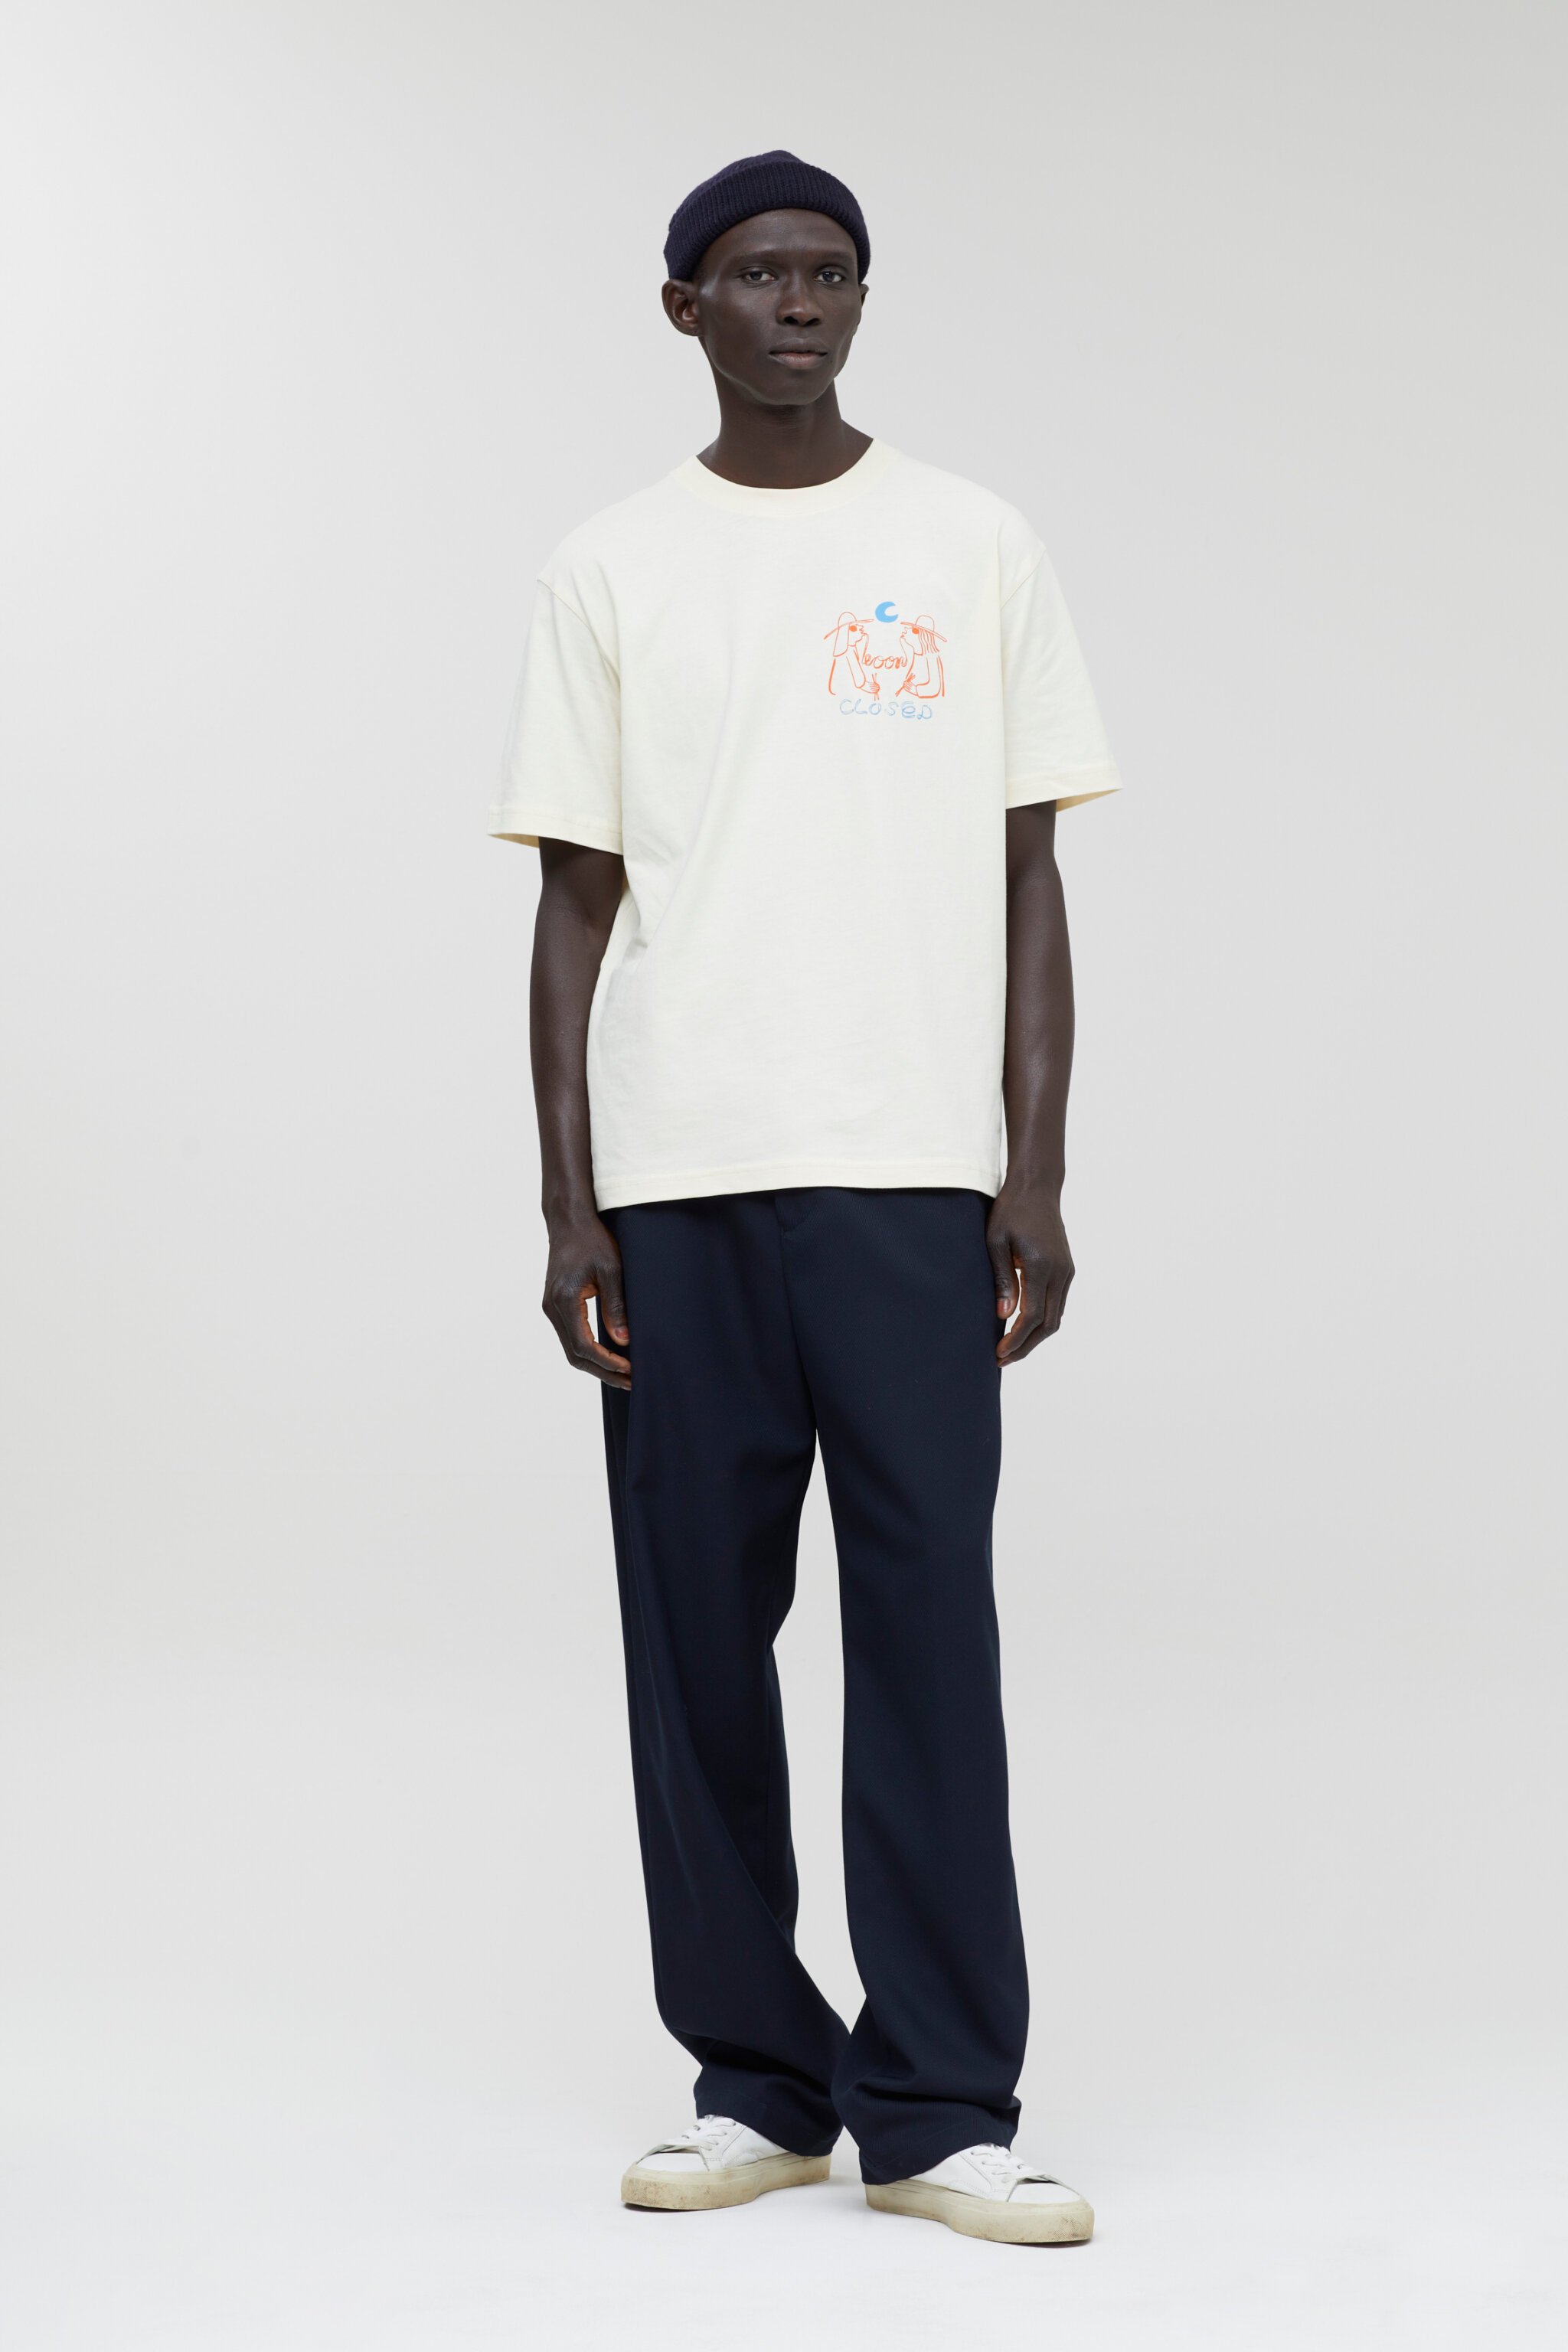 Person wearing an off-white t-shirt